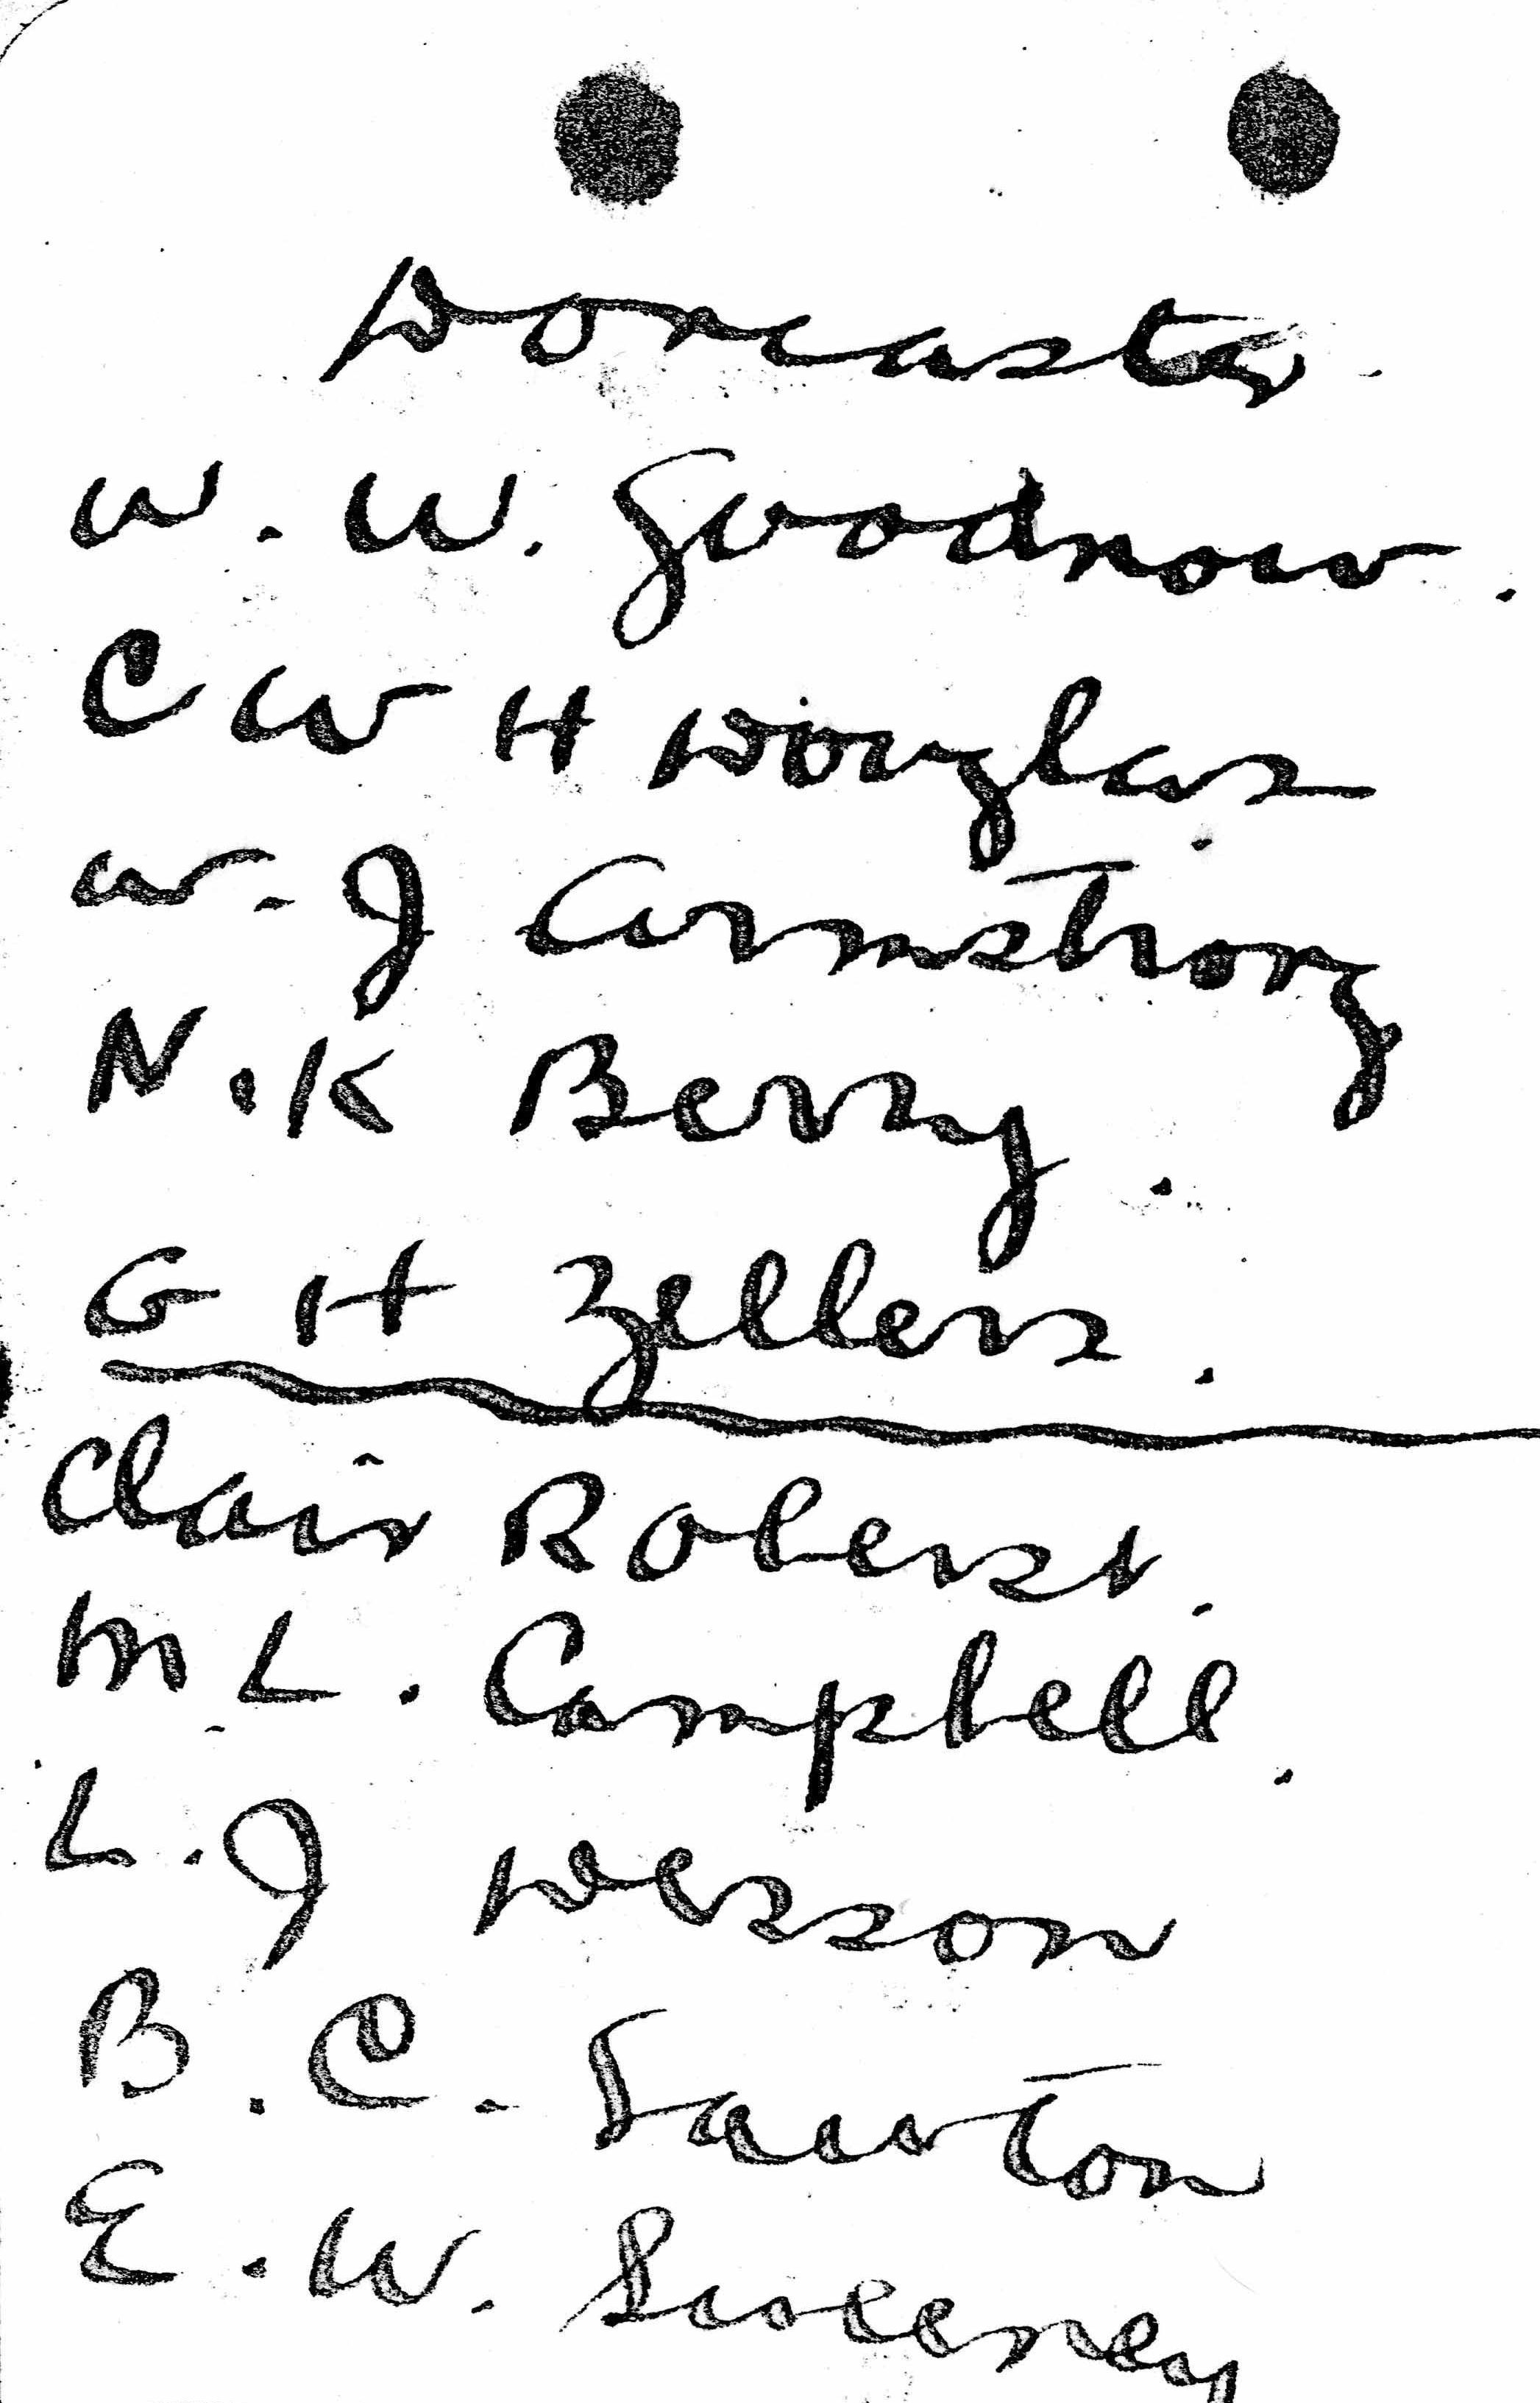 A handwritten list headed "Doncaster" followed by the names of ten cadets.